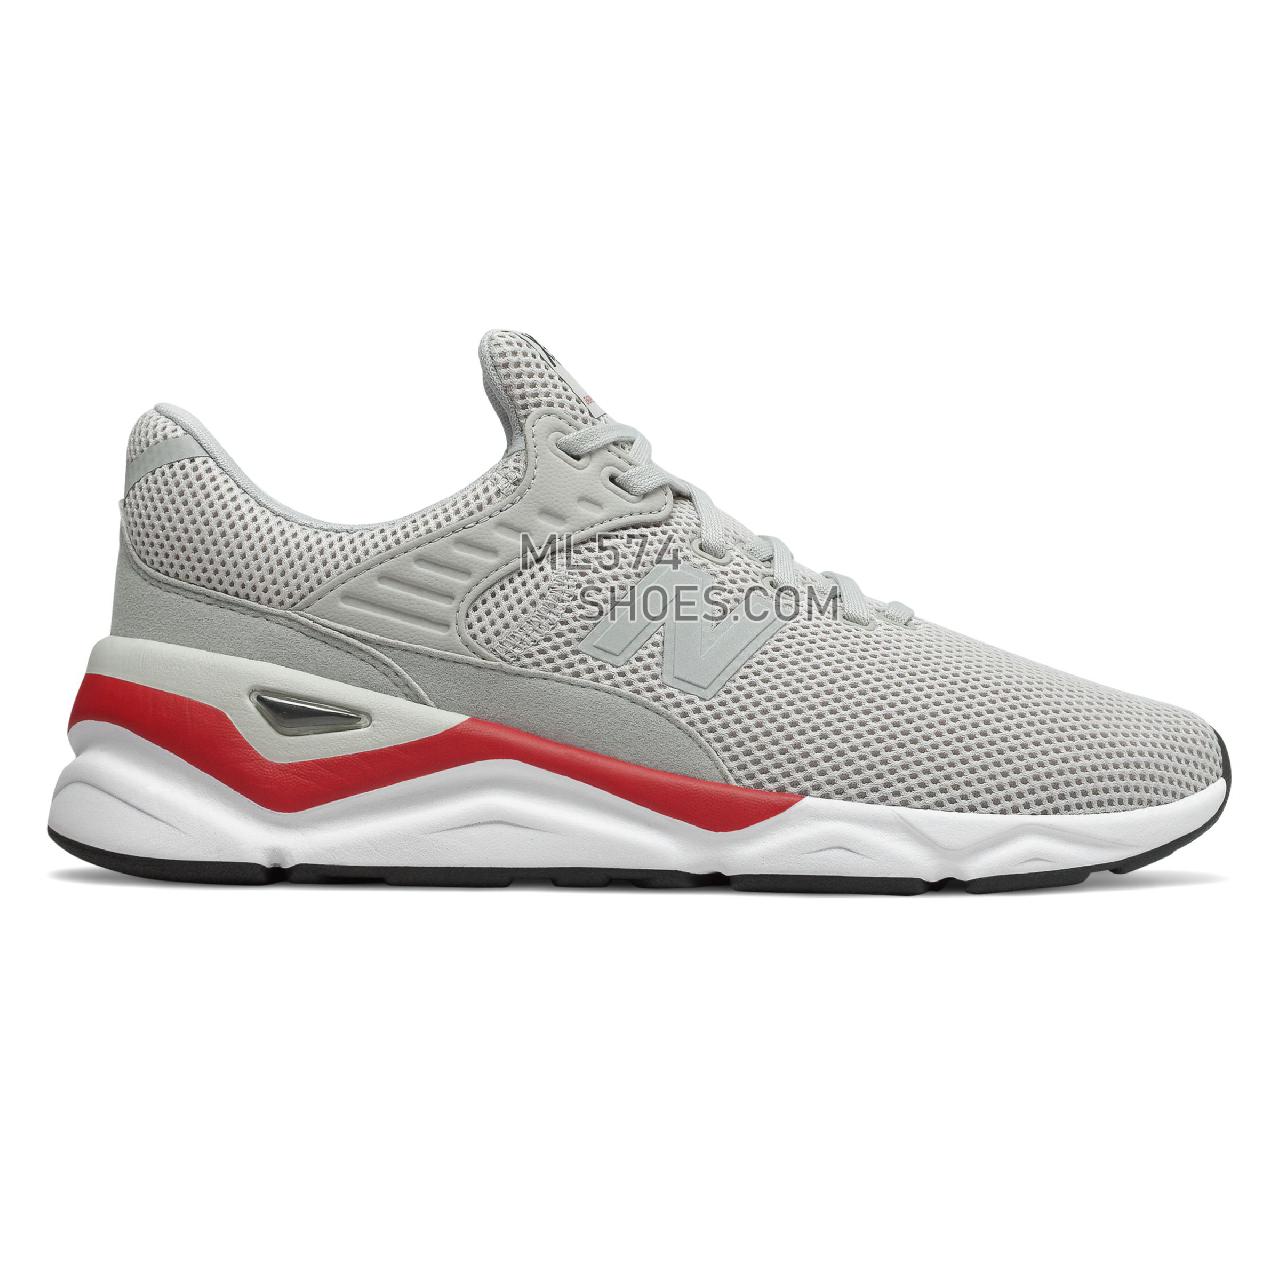 New Balance X-90 - Men's Sport Style Sneakers - Rain Cloud with Team Red - MSX90TXD